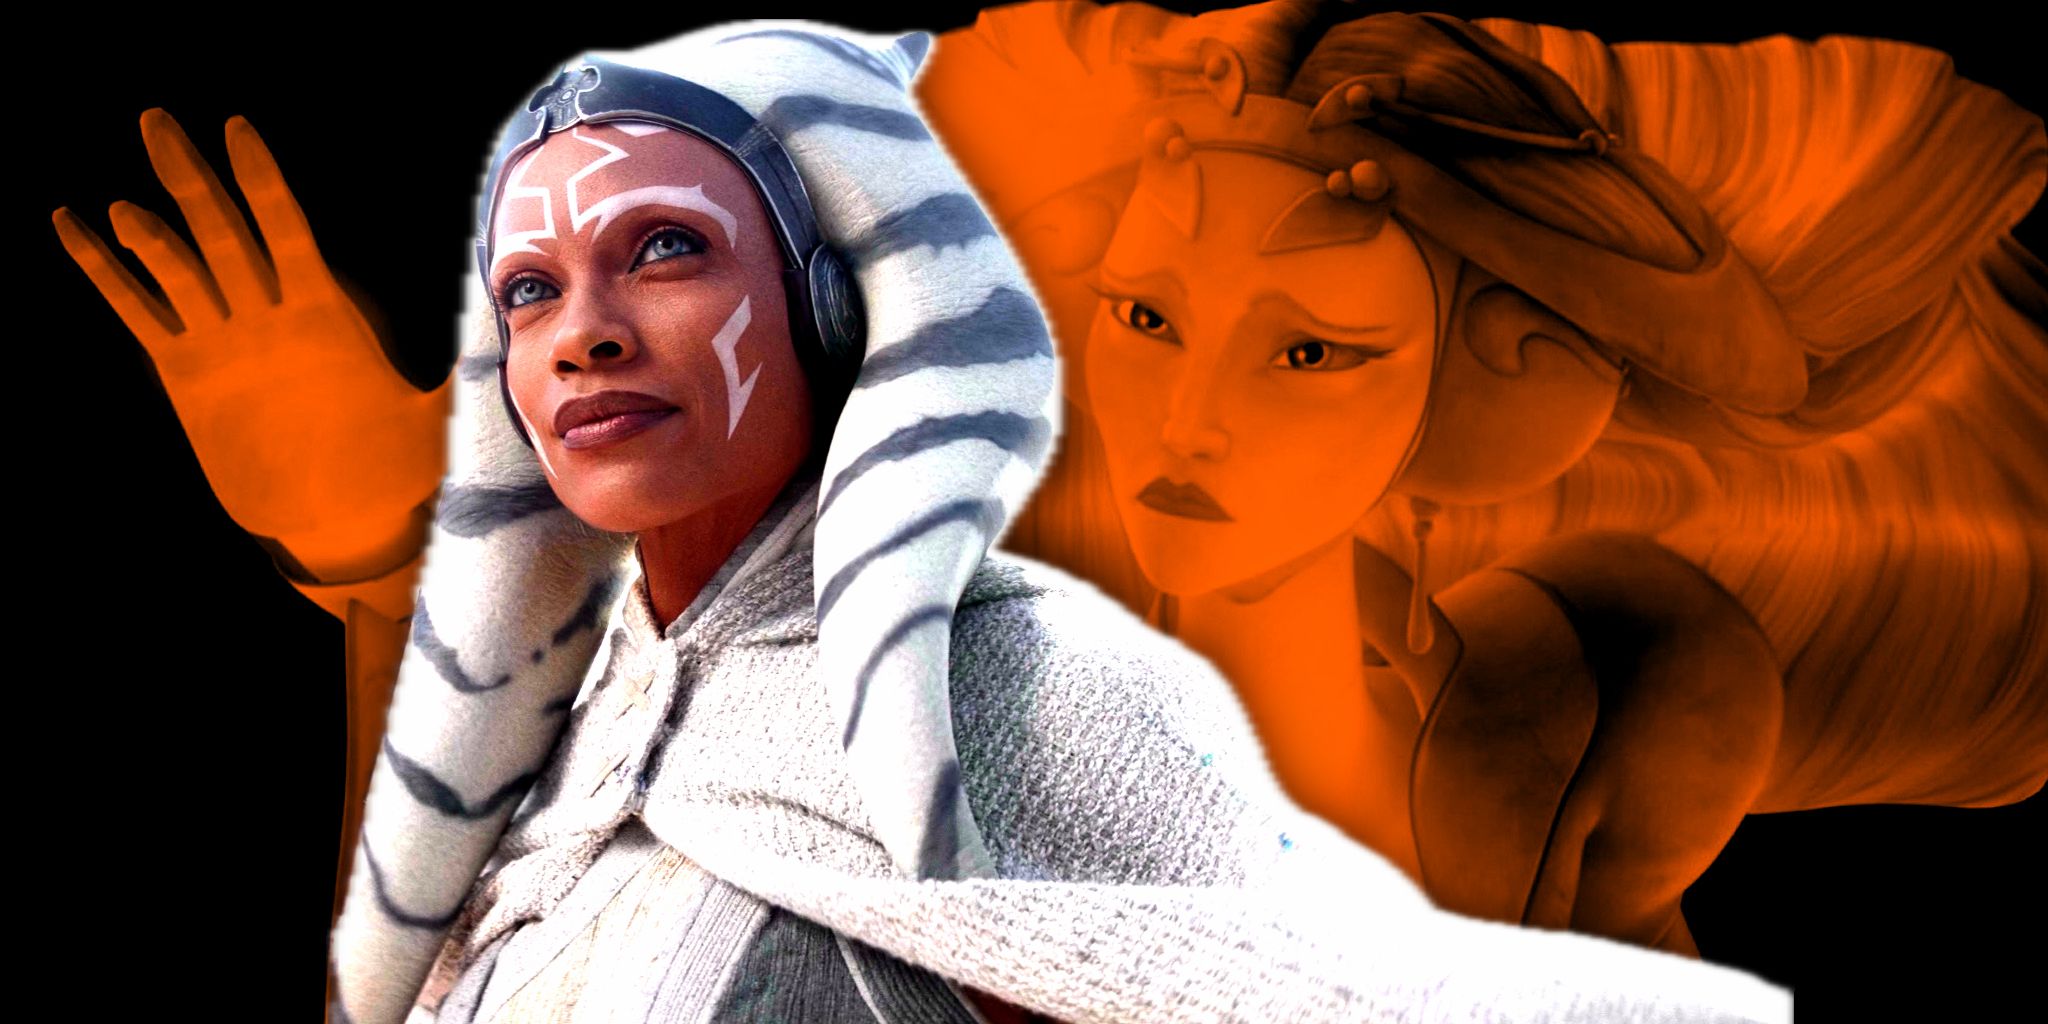 Ahsoka the White superimposed over the Daughter in Star Wars